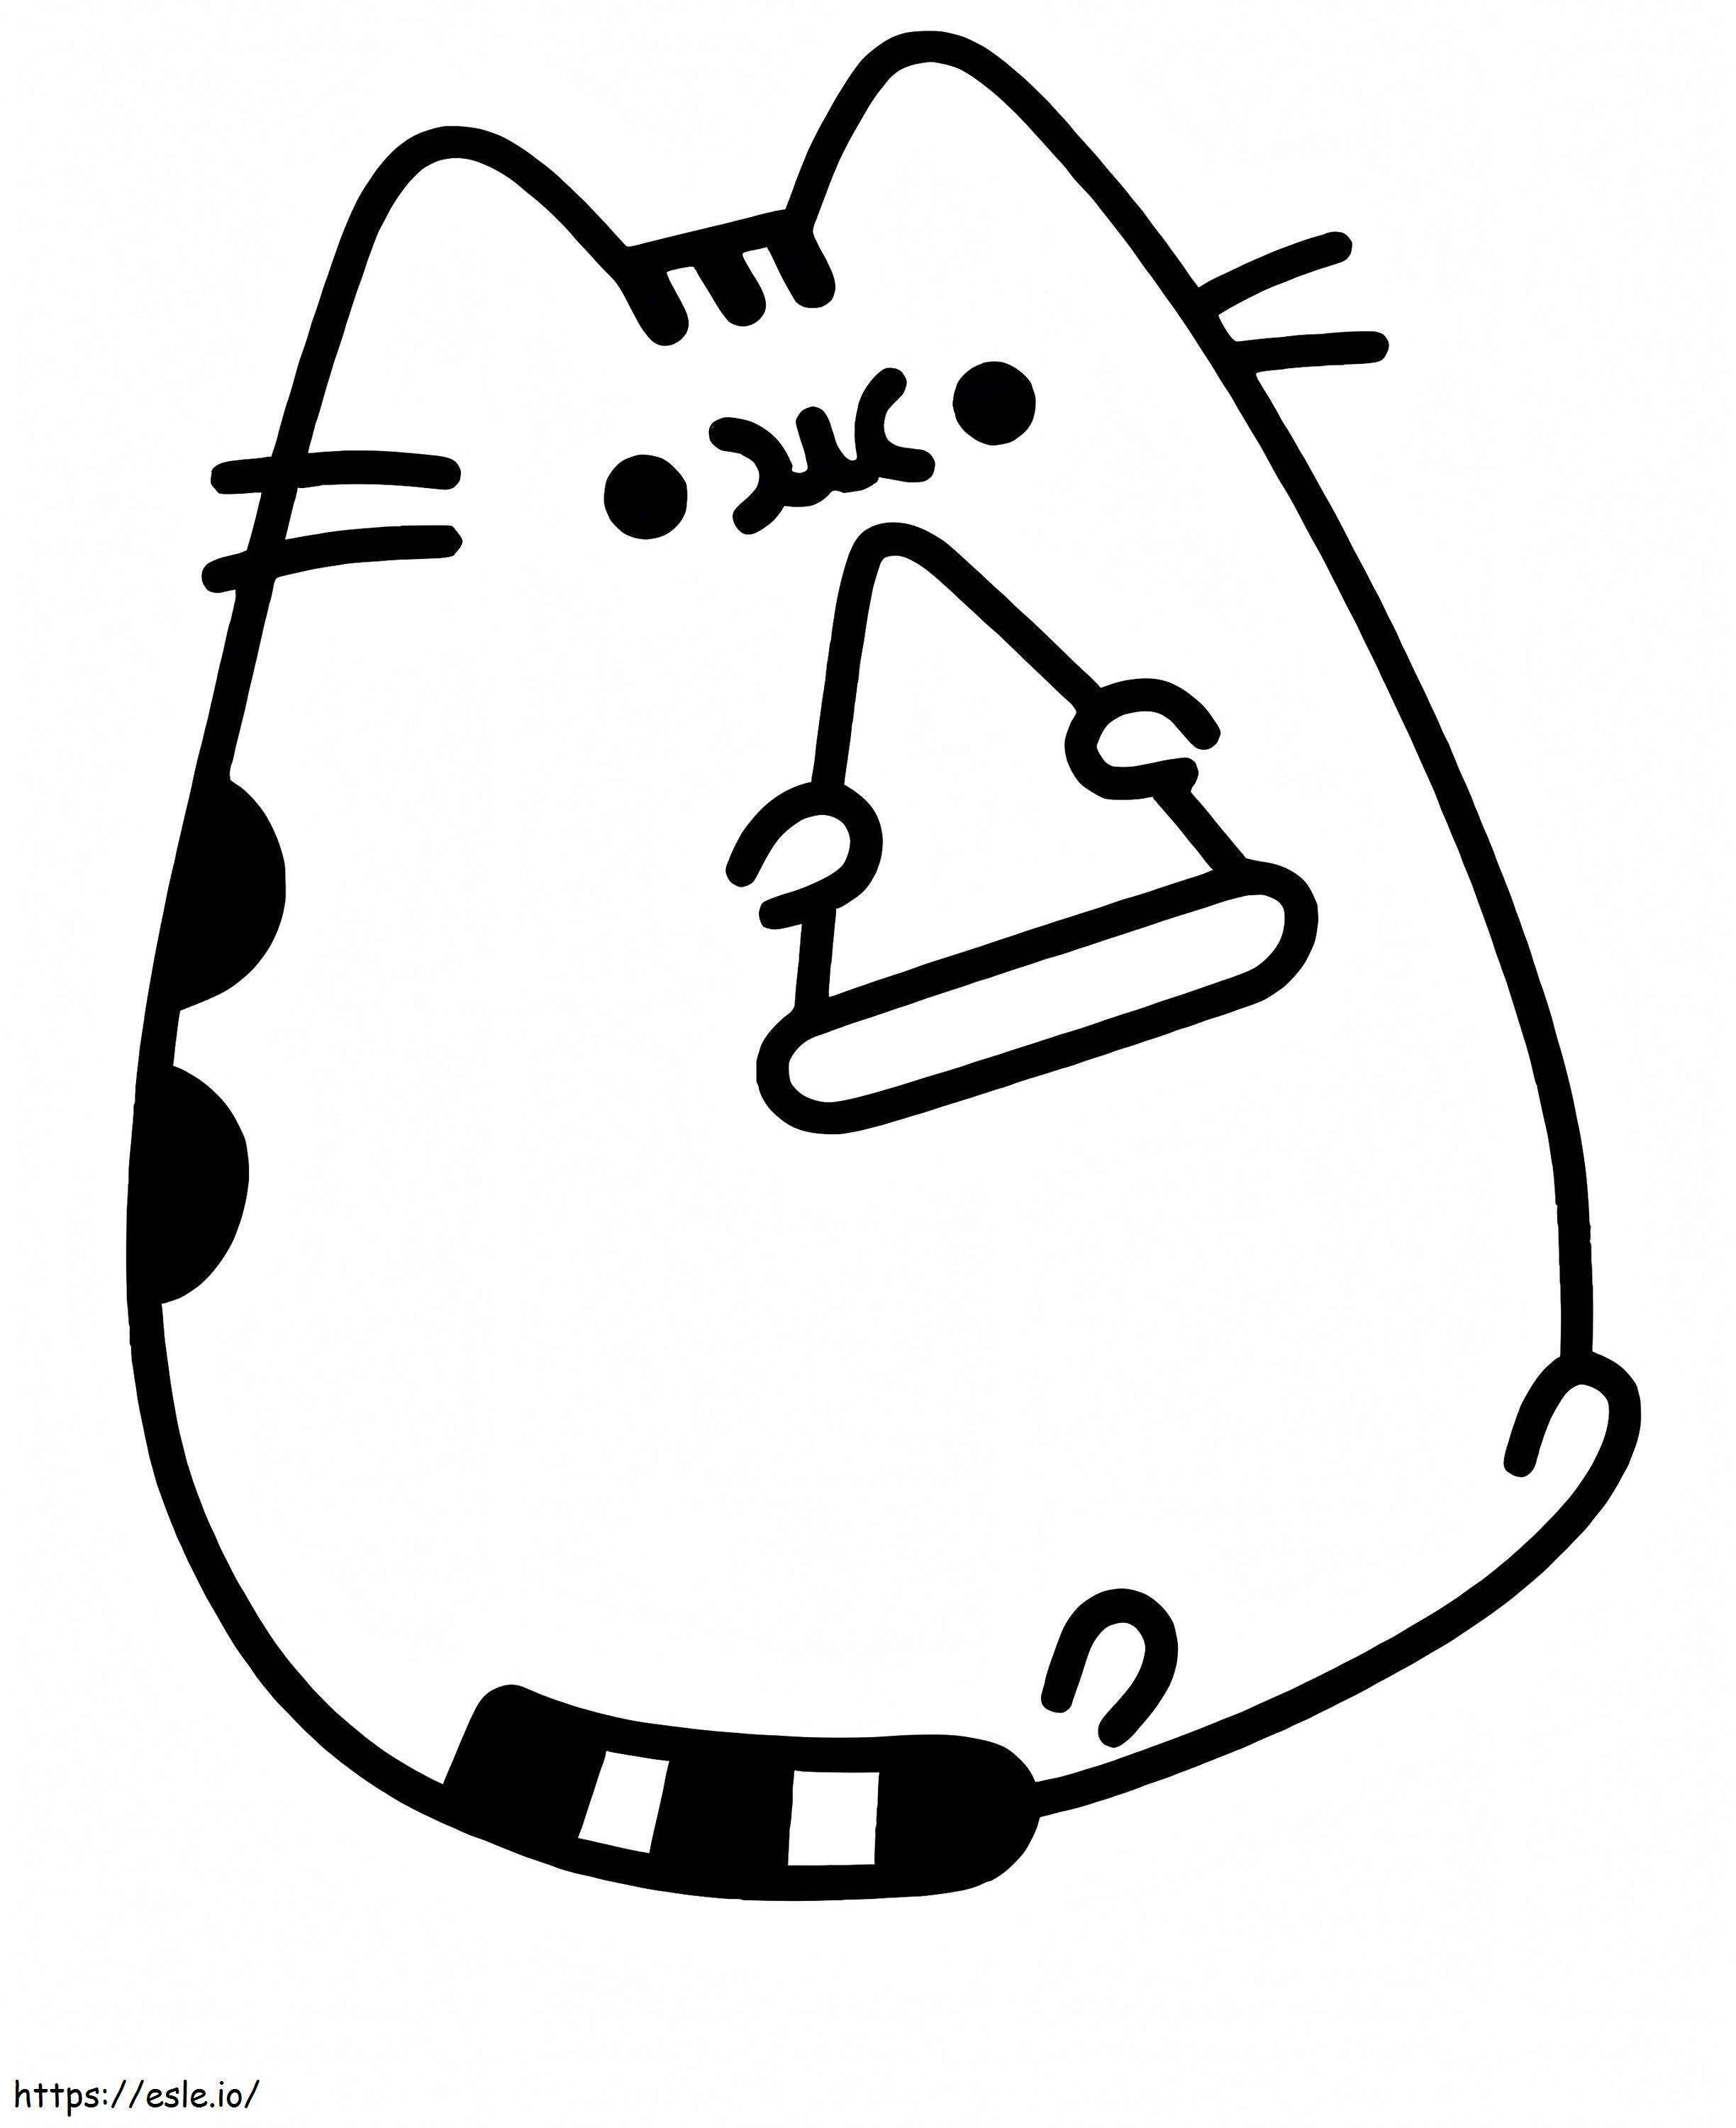 Pusheen Eating Pizza coloring page